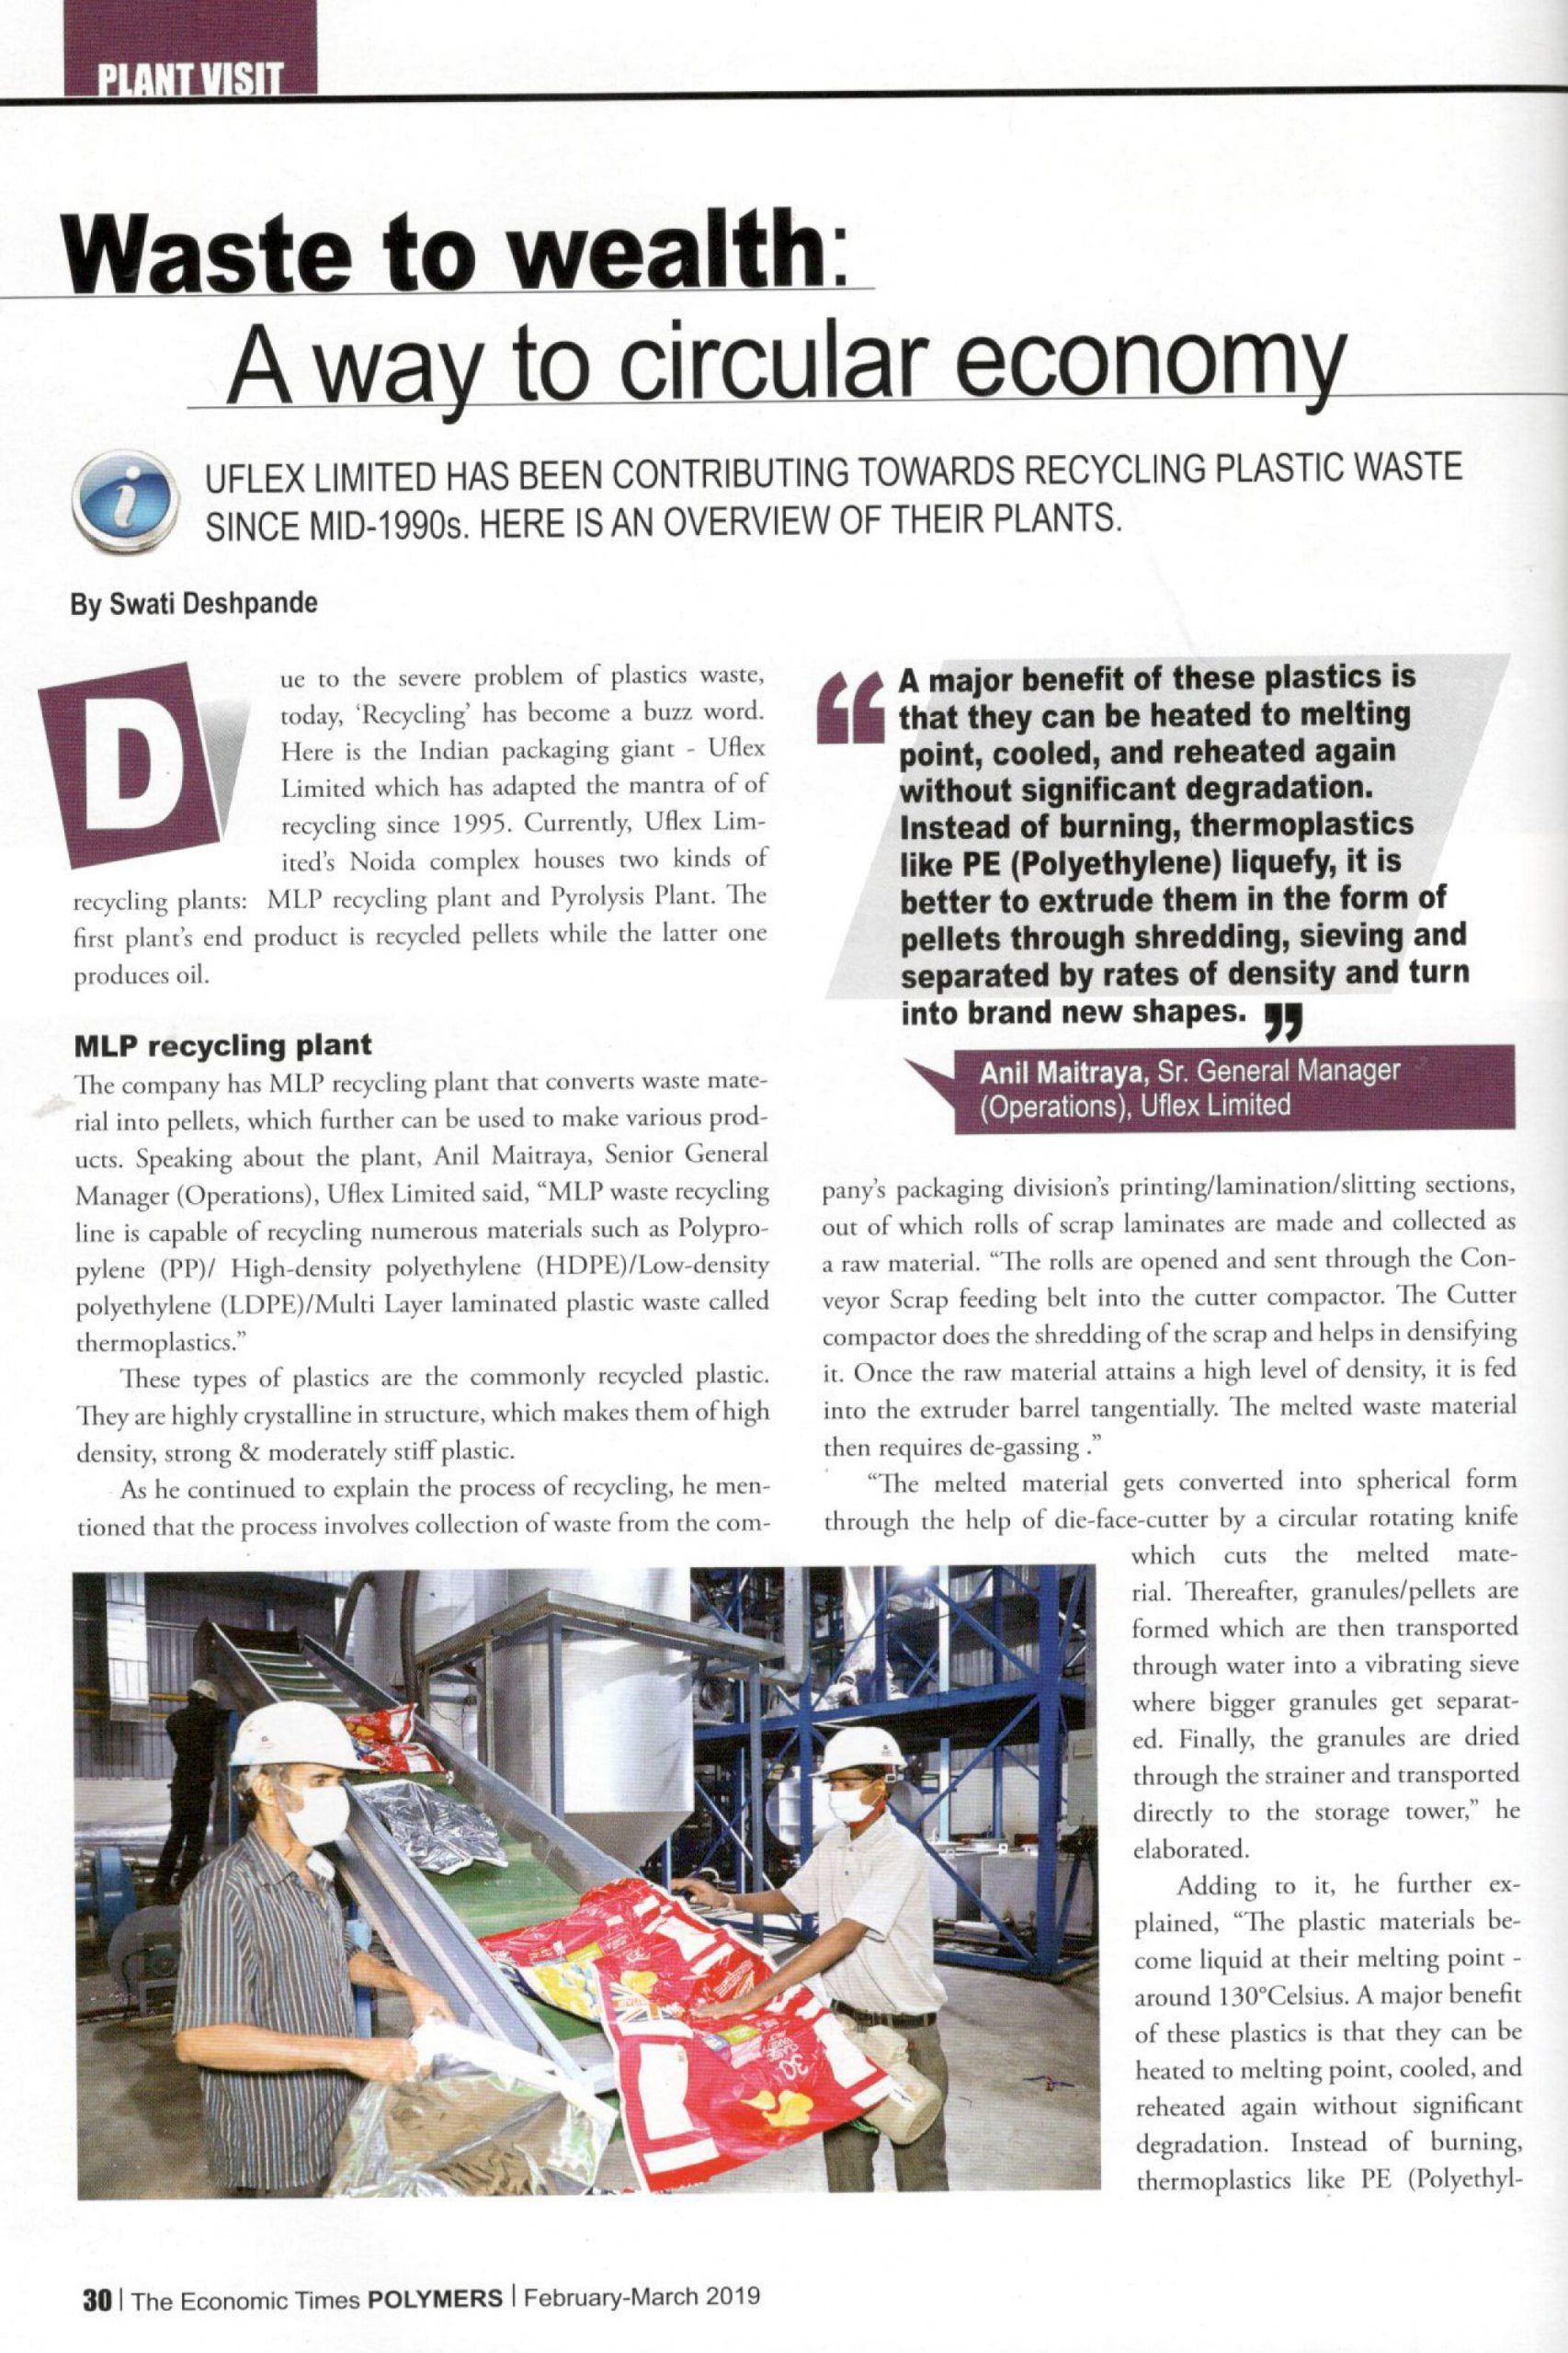 Waste to Wealth : UFlex has been Contributing towards Recycling Plastic Waste since Mid 1990s – Reports The ET Polymers | Feb-Mar 2019 Print Edition